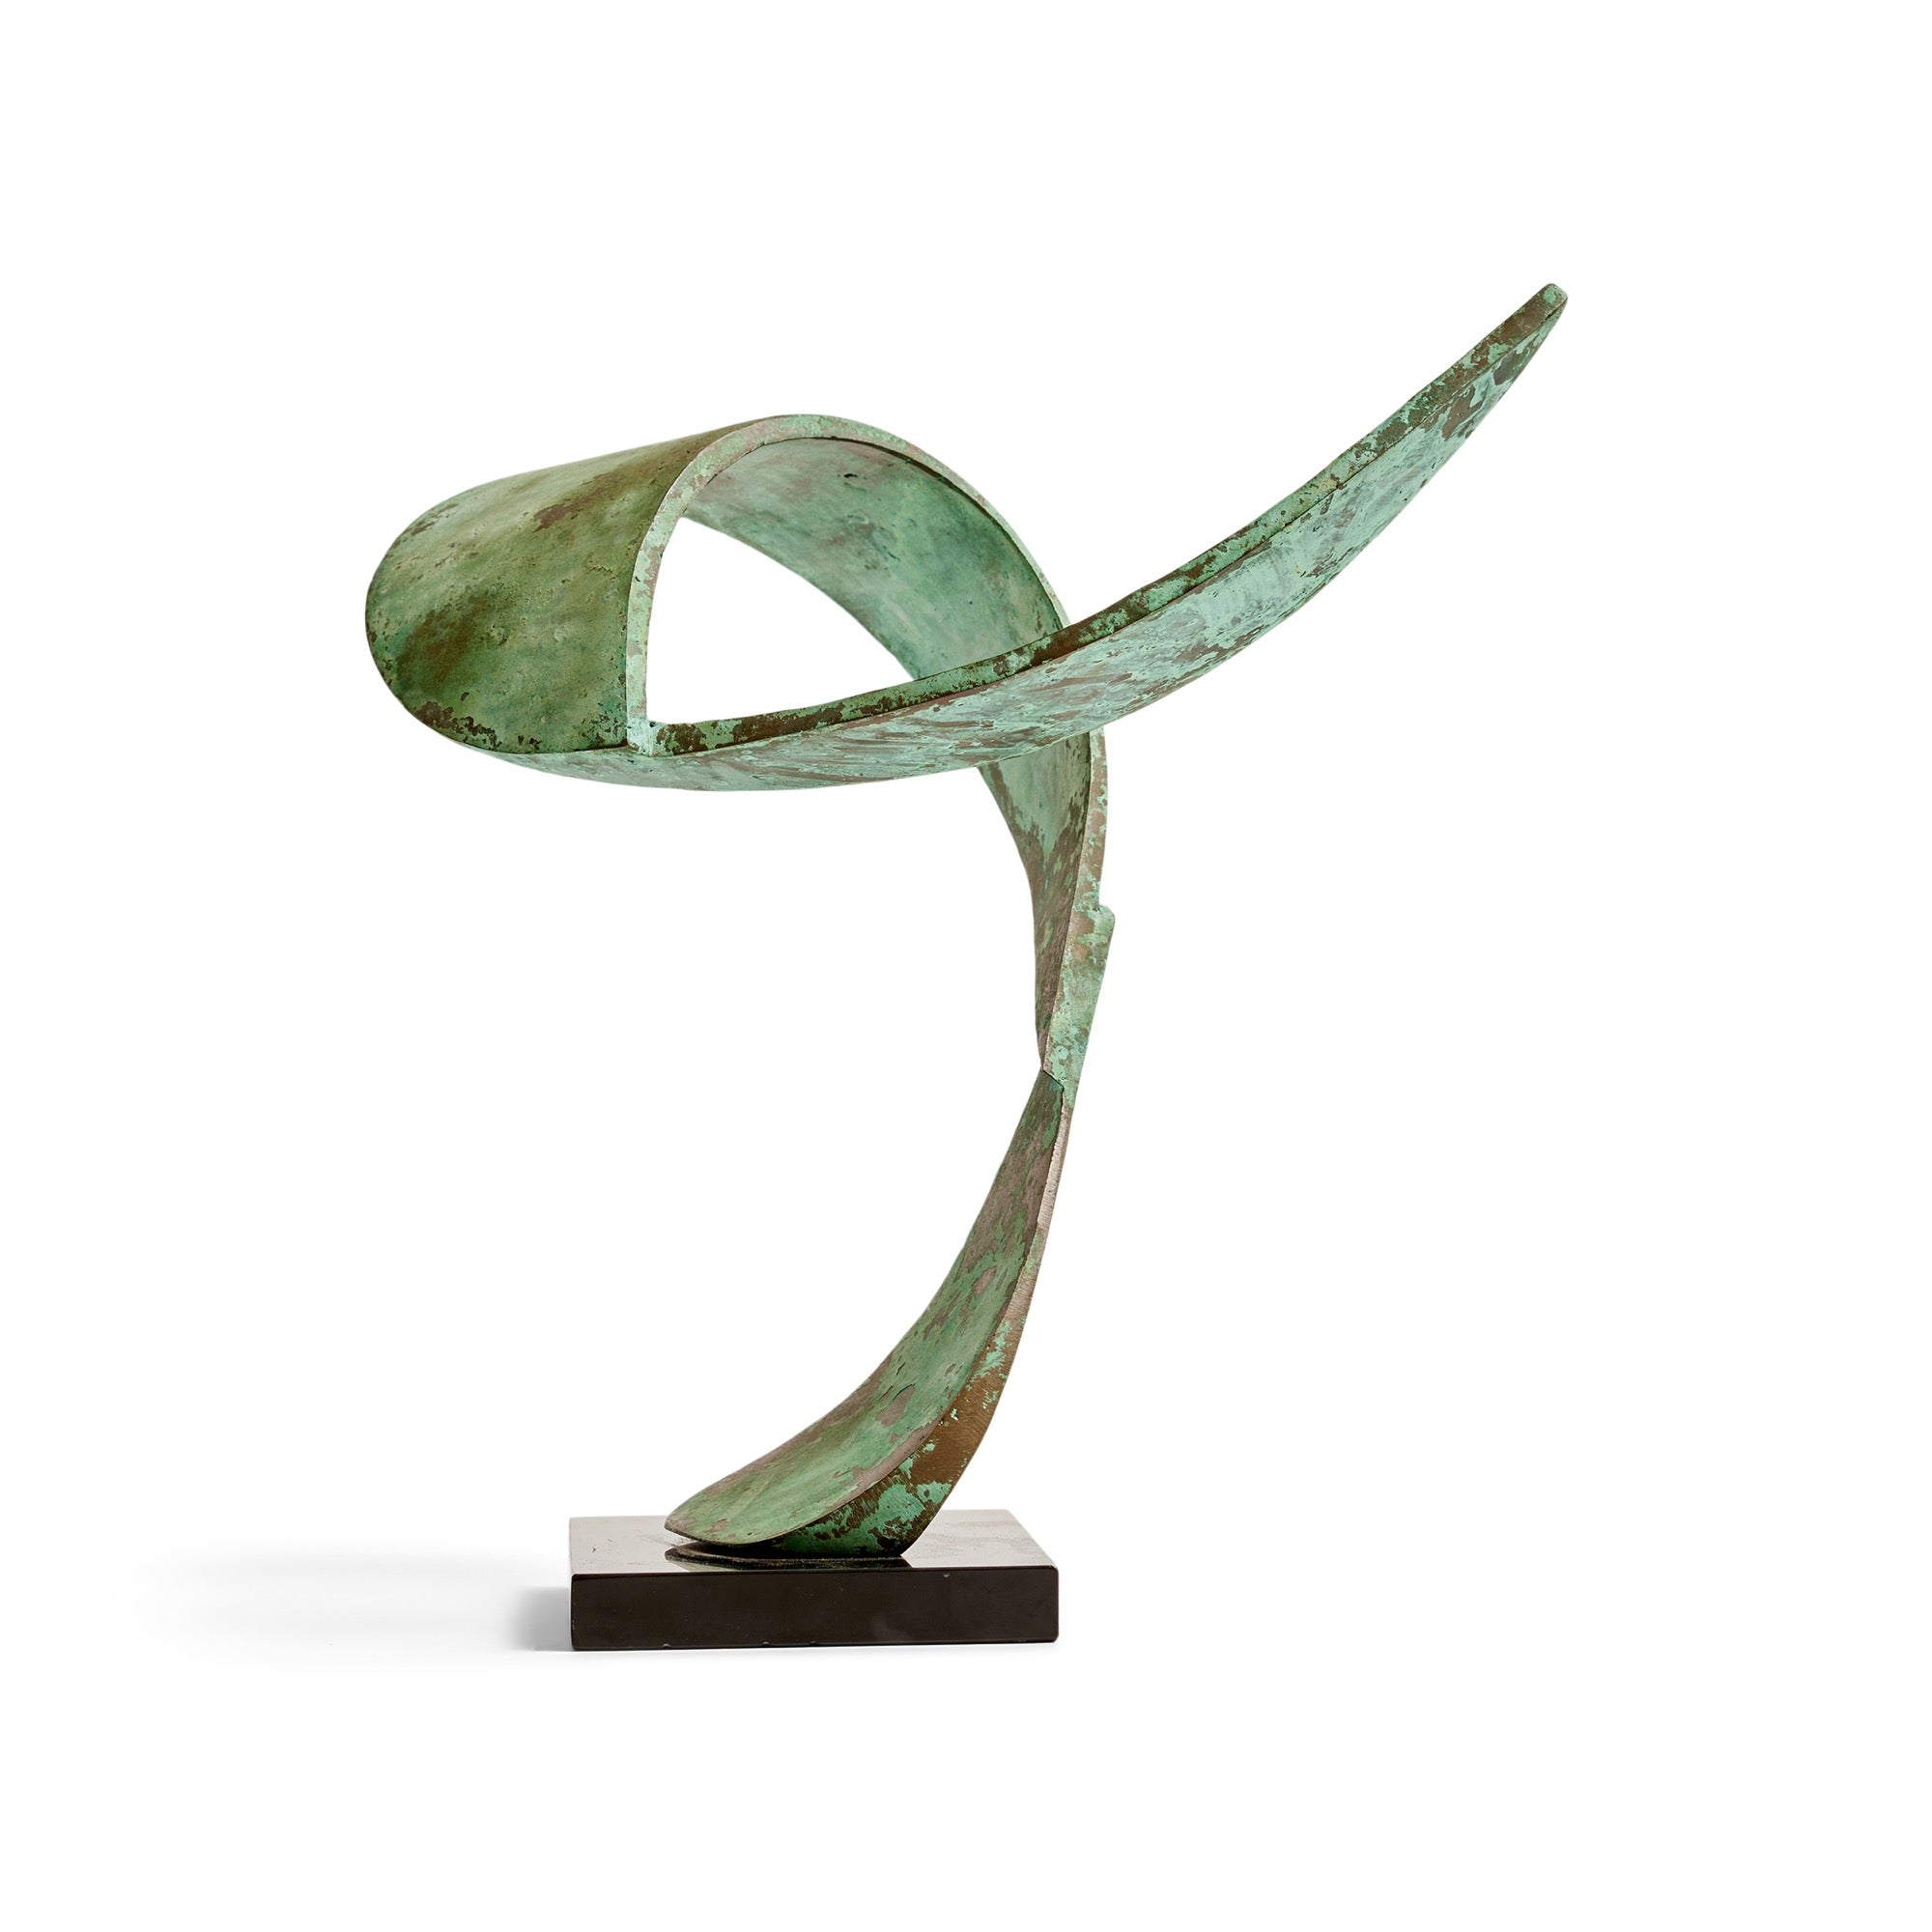 Abstract Bronze Sculpture by Seymour Meyer, 1960s - WYETH